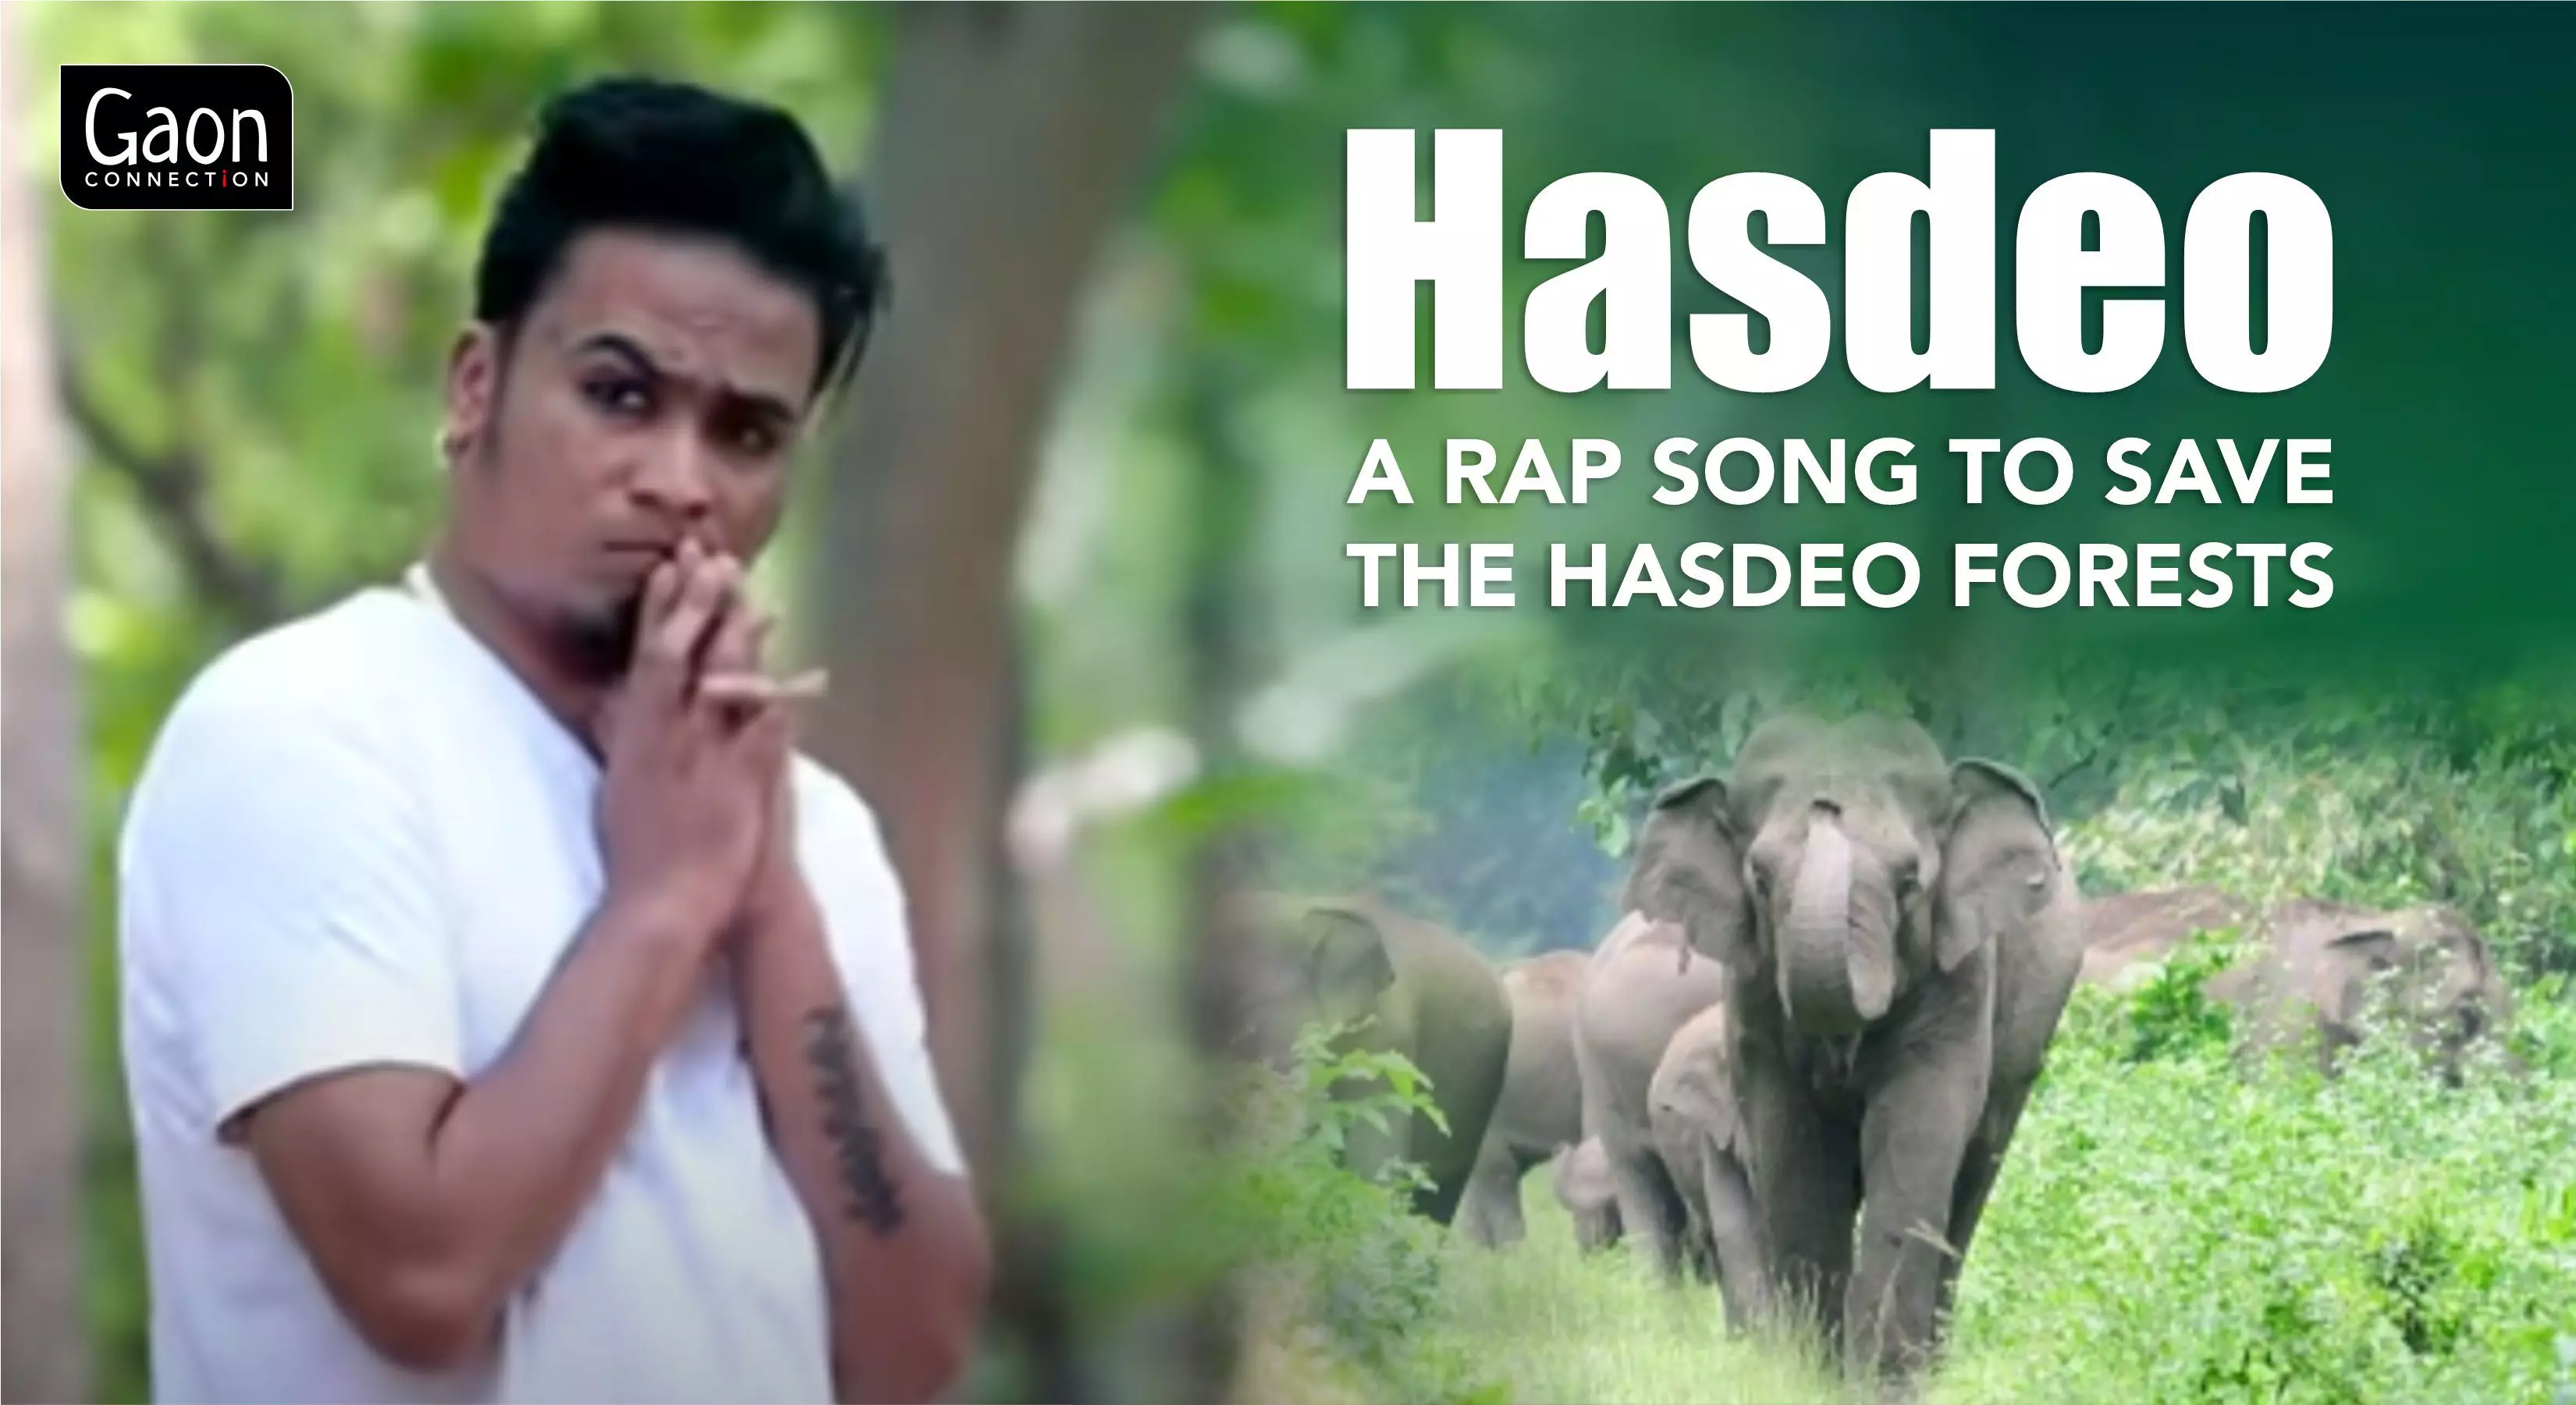 A Rap Song to Save Hasdeo Forests